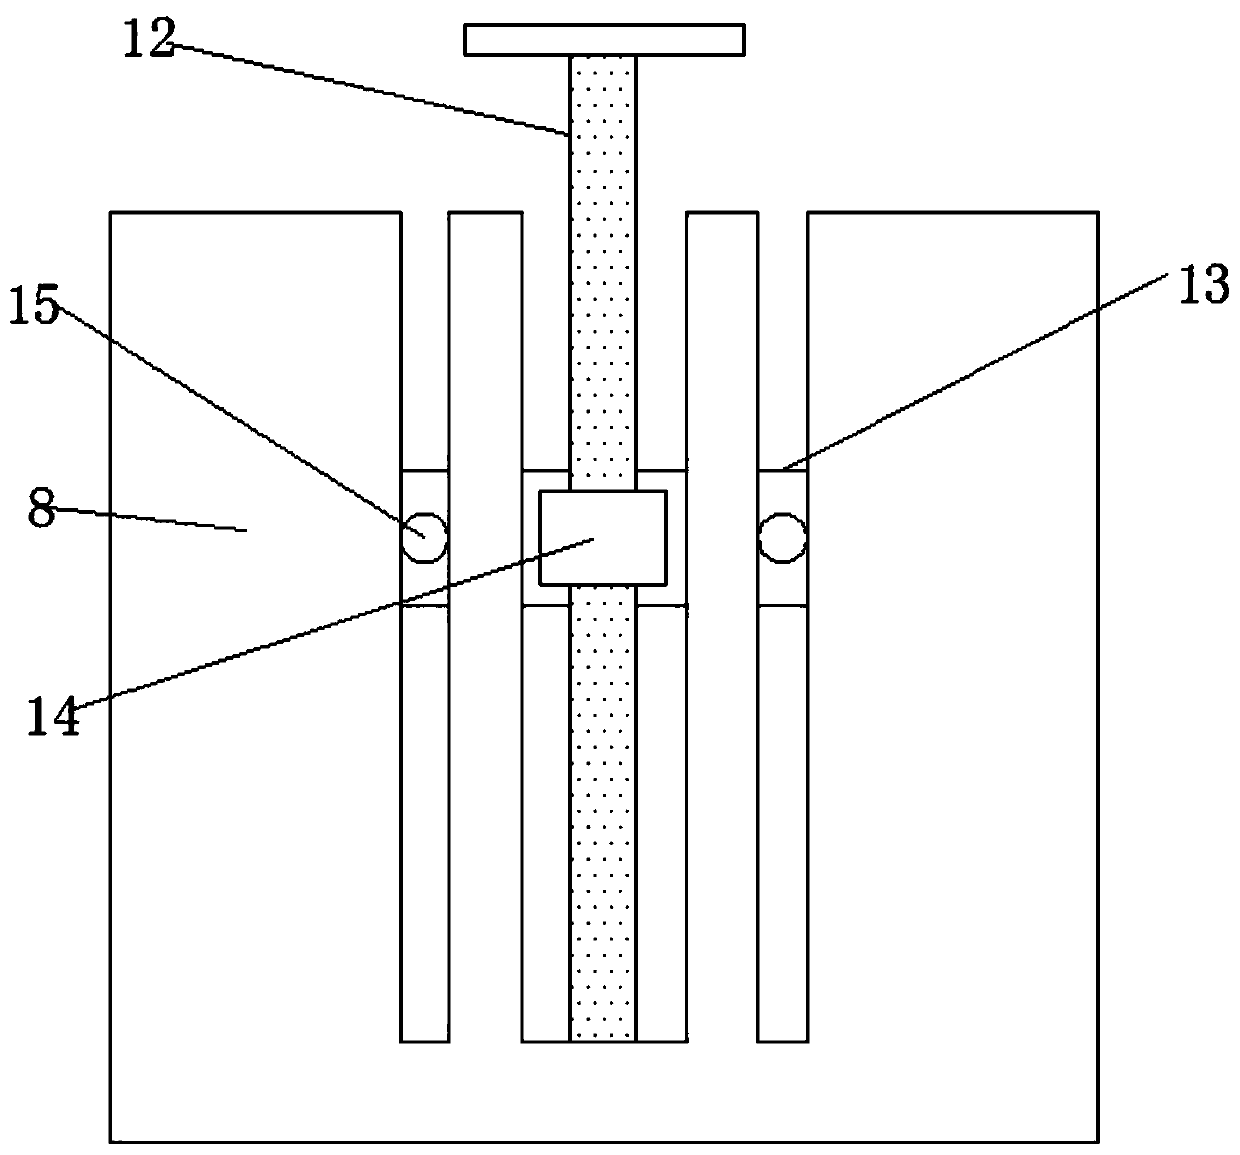 A method for detecting leakage pressure of an electronic water pump